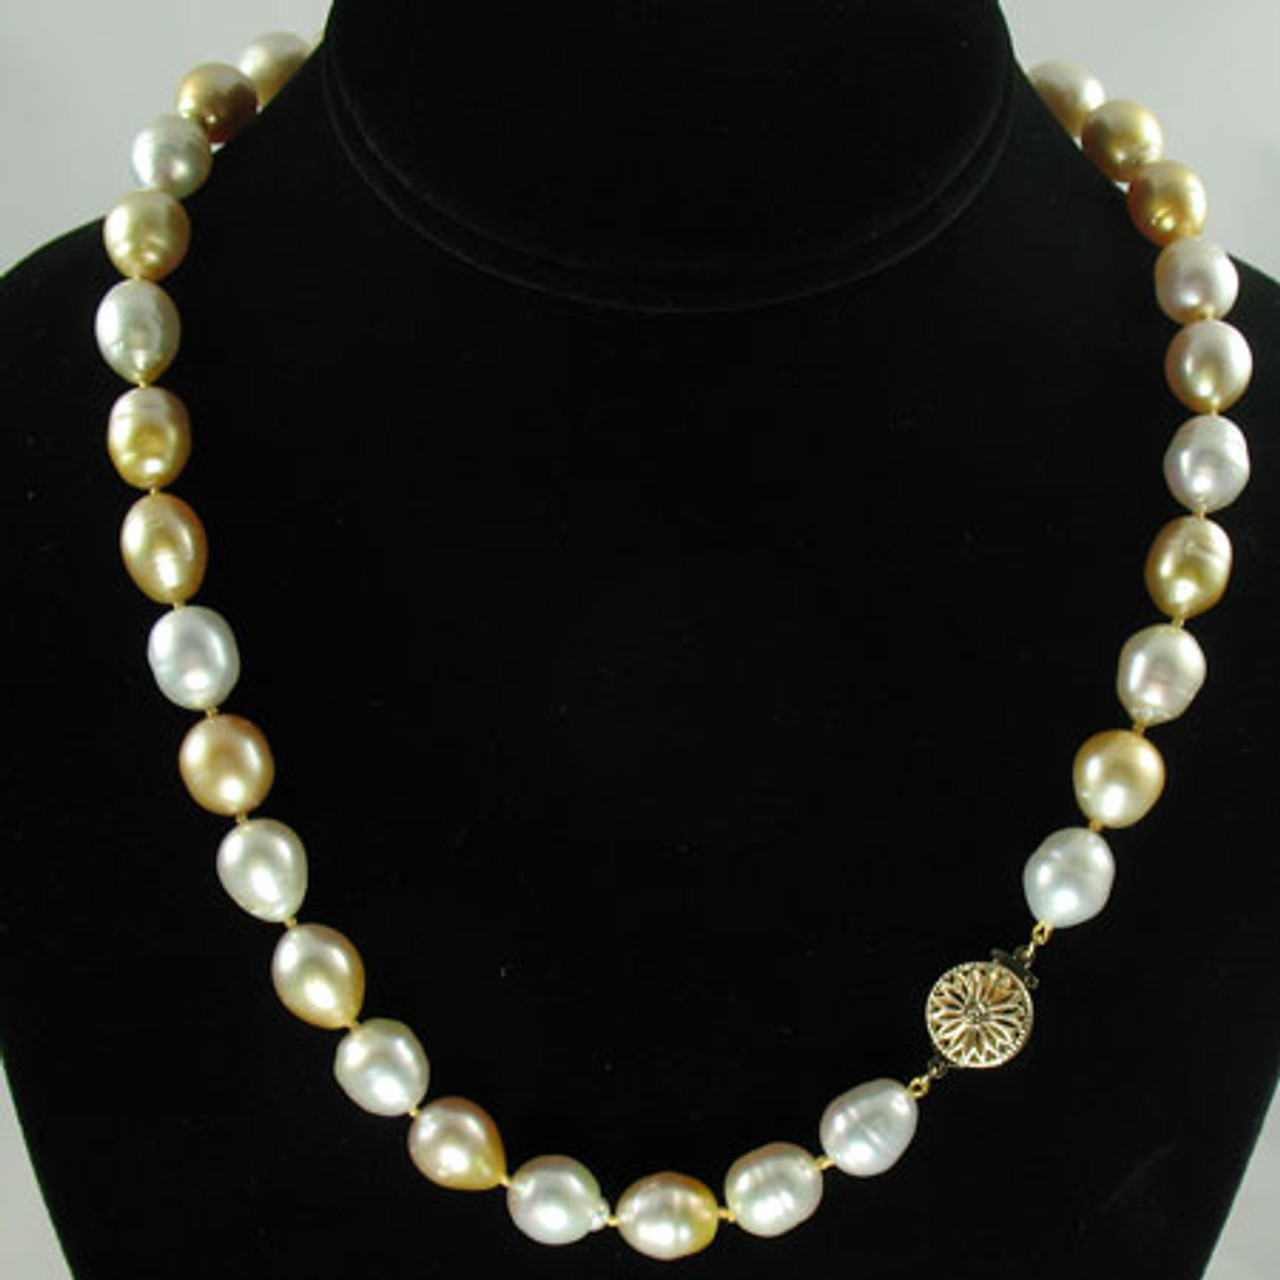 Best Cut Gems - South Sea Pearl Strand Necklace #511